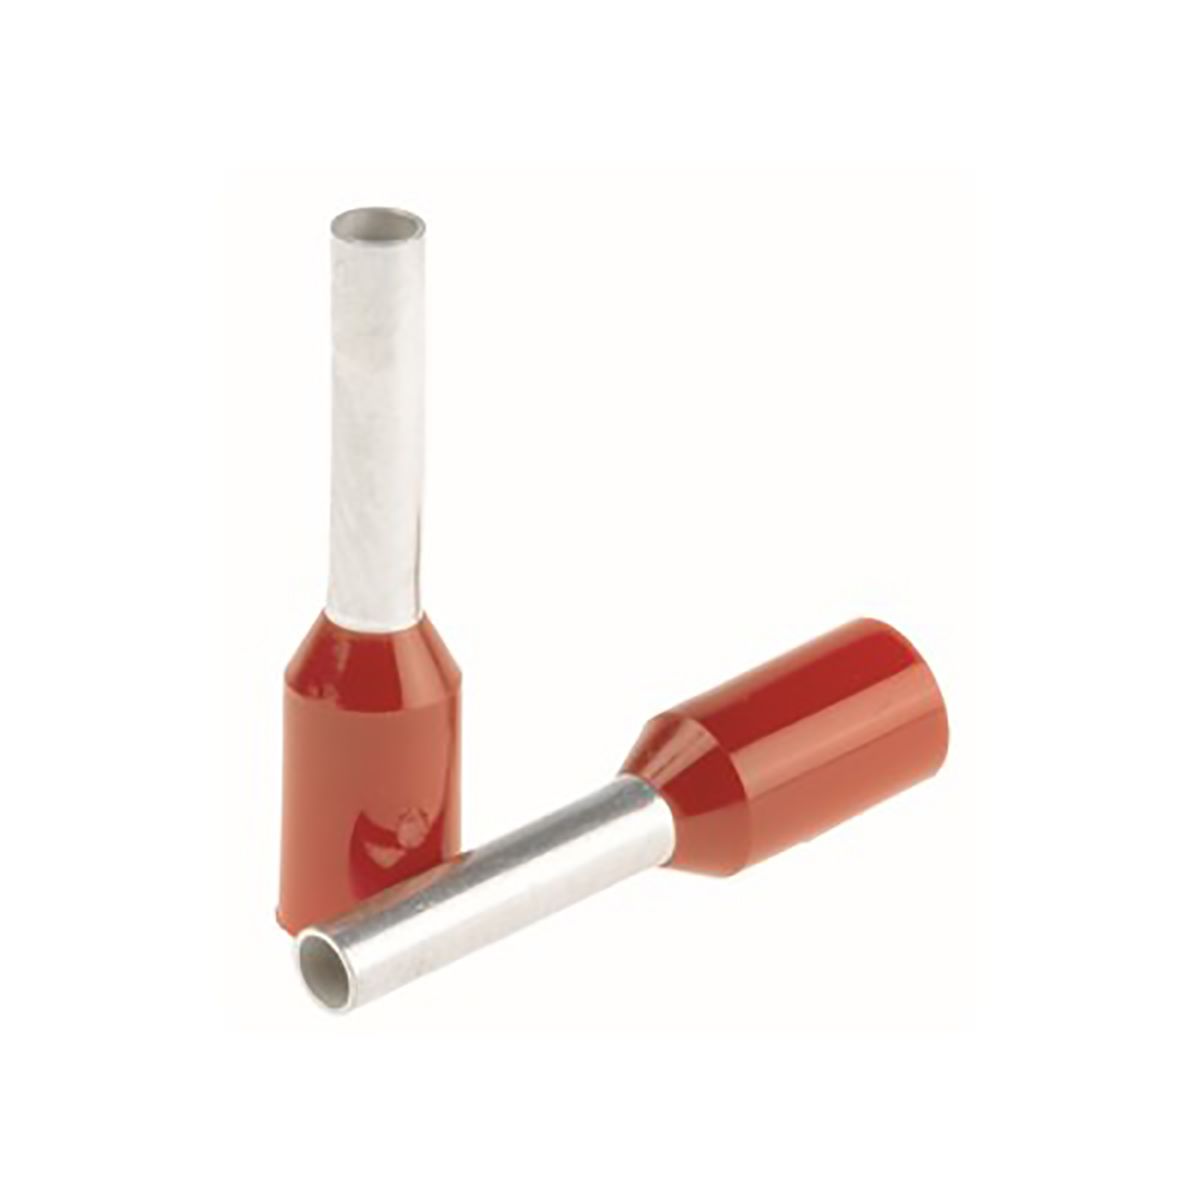 SES Sterling, PLIO Insulated Crimp Bootlace Ferrule, 8mm Pin Length, 1.8mm Pin Diameter, 1mm² Wire Size, Red